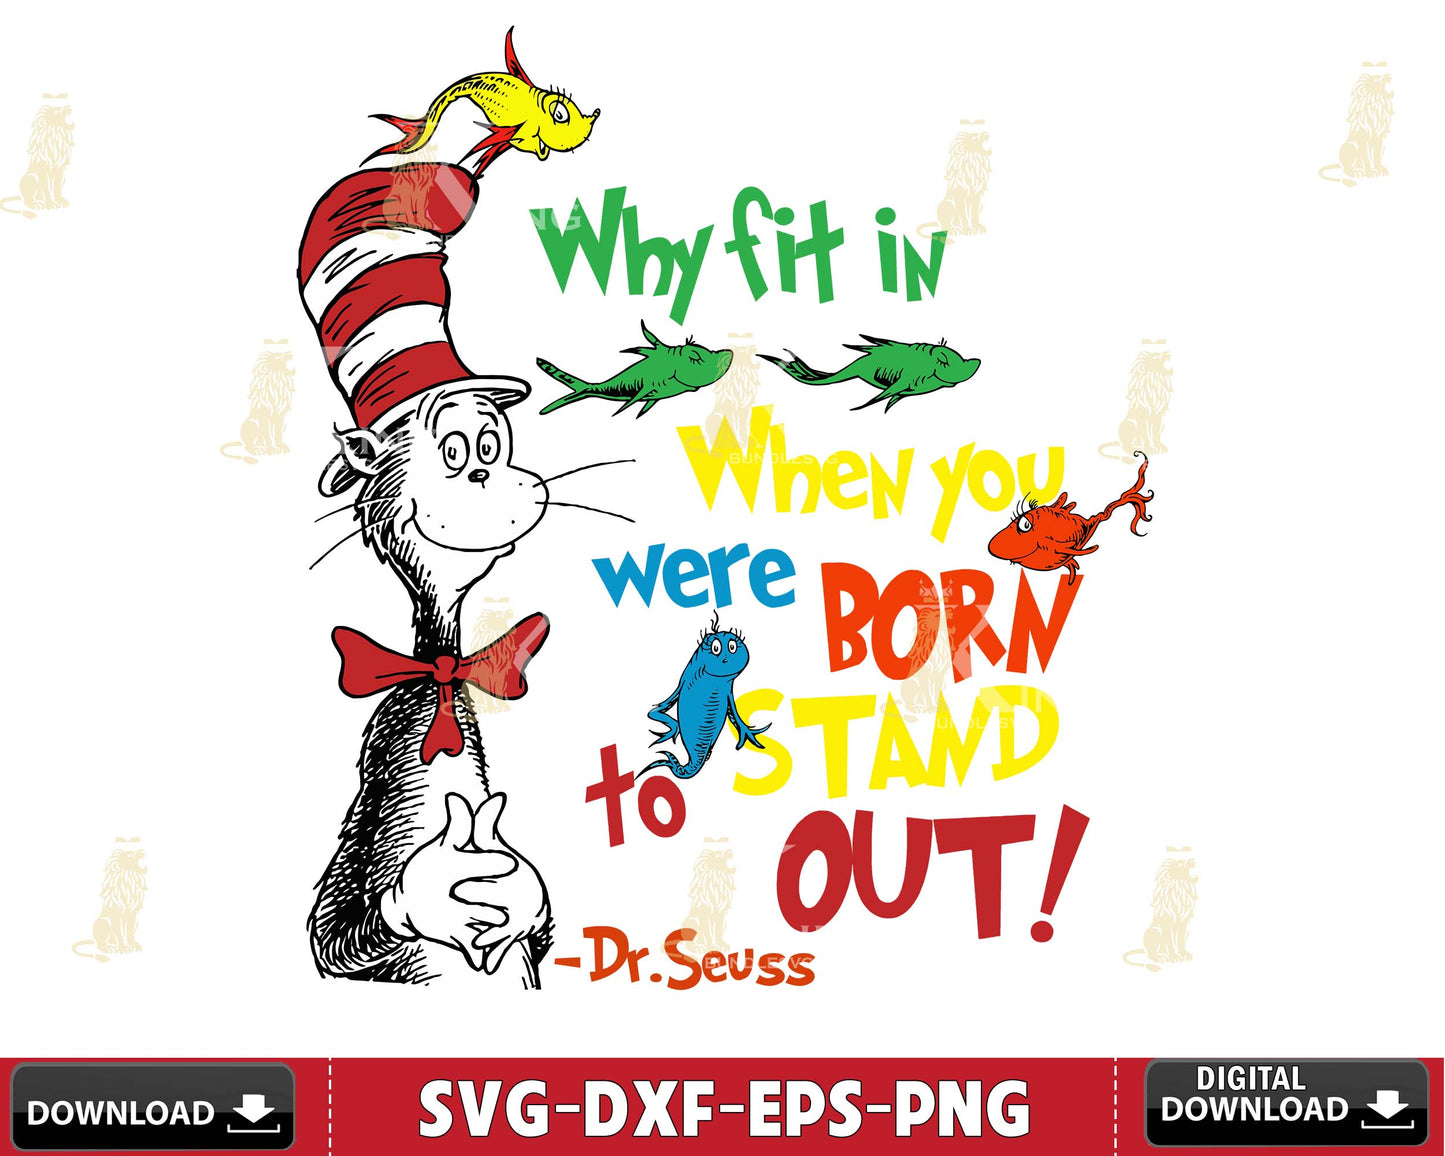 Dr Seuss Why fit in when you were born stand to out svg eps dxf png ,m ...